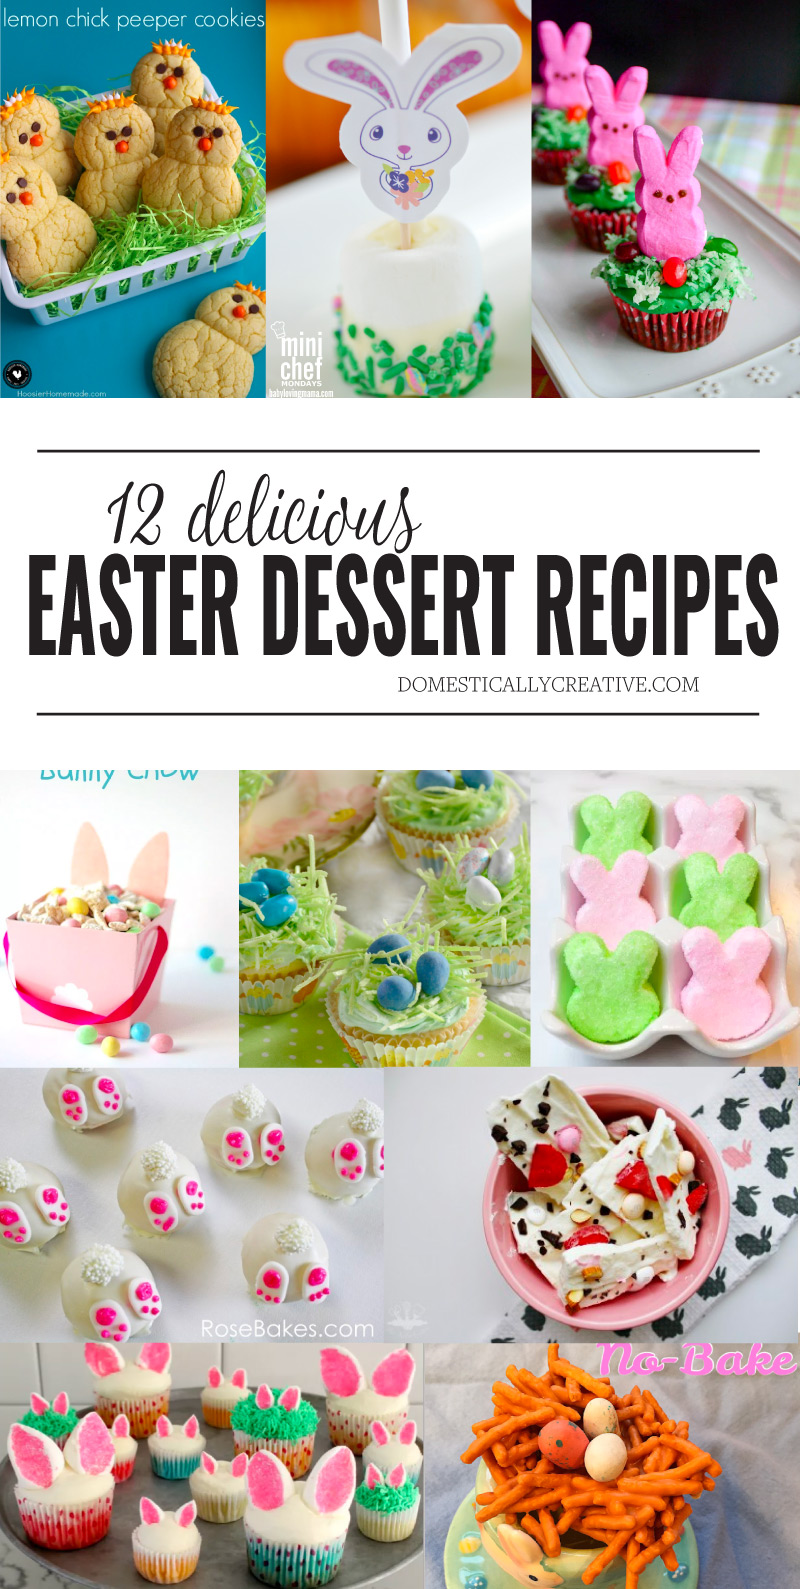 12 yummy and festive Easter desserts